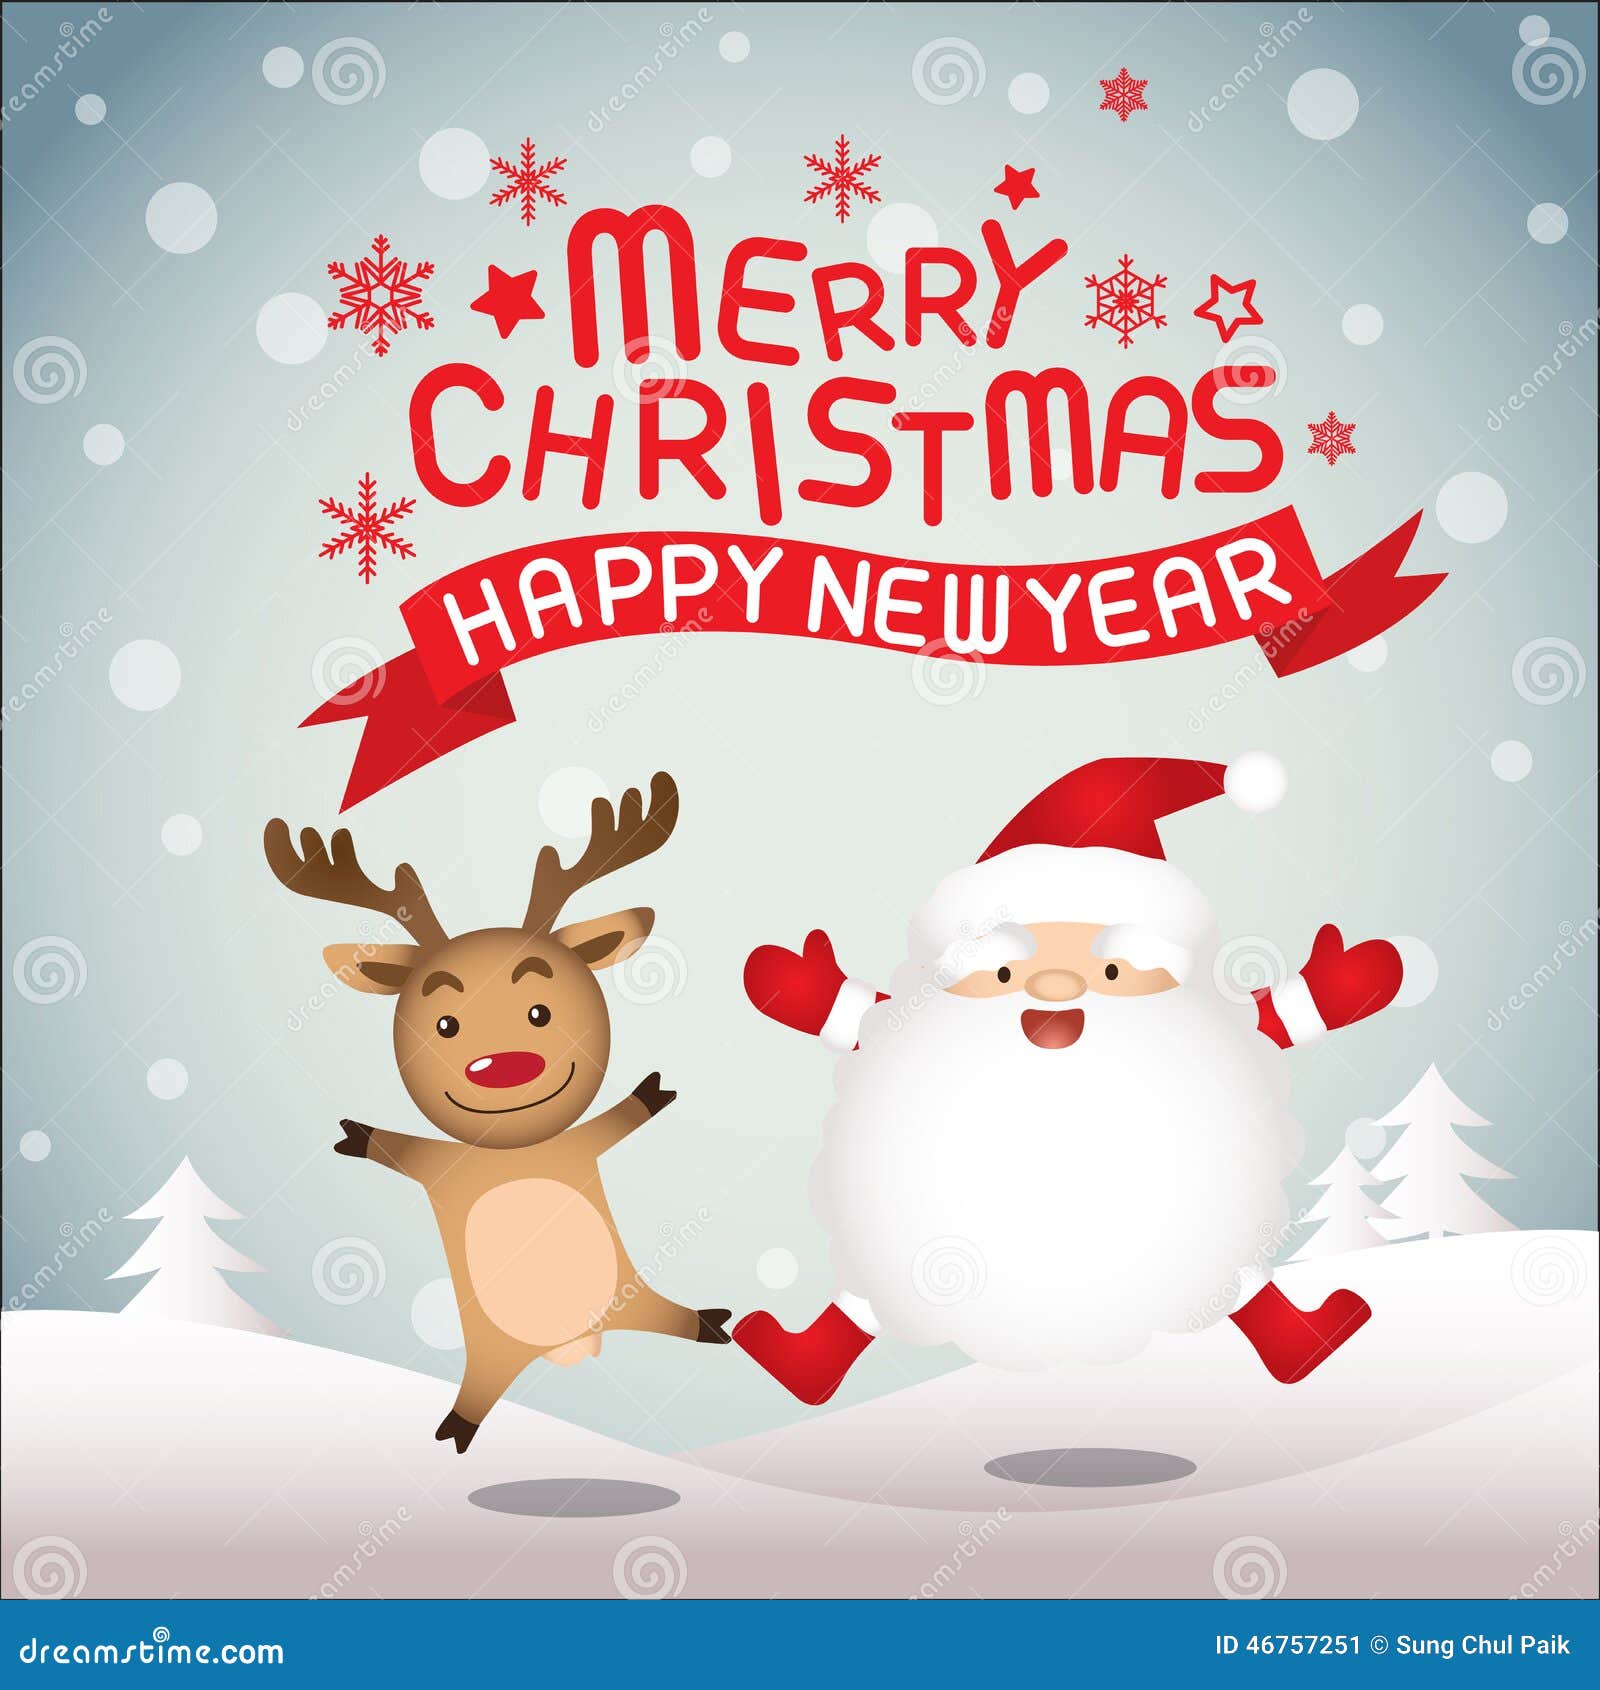 merry christmas  santa claus and rudolph stock